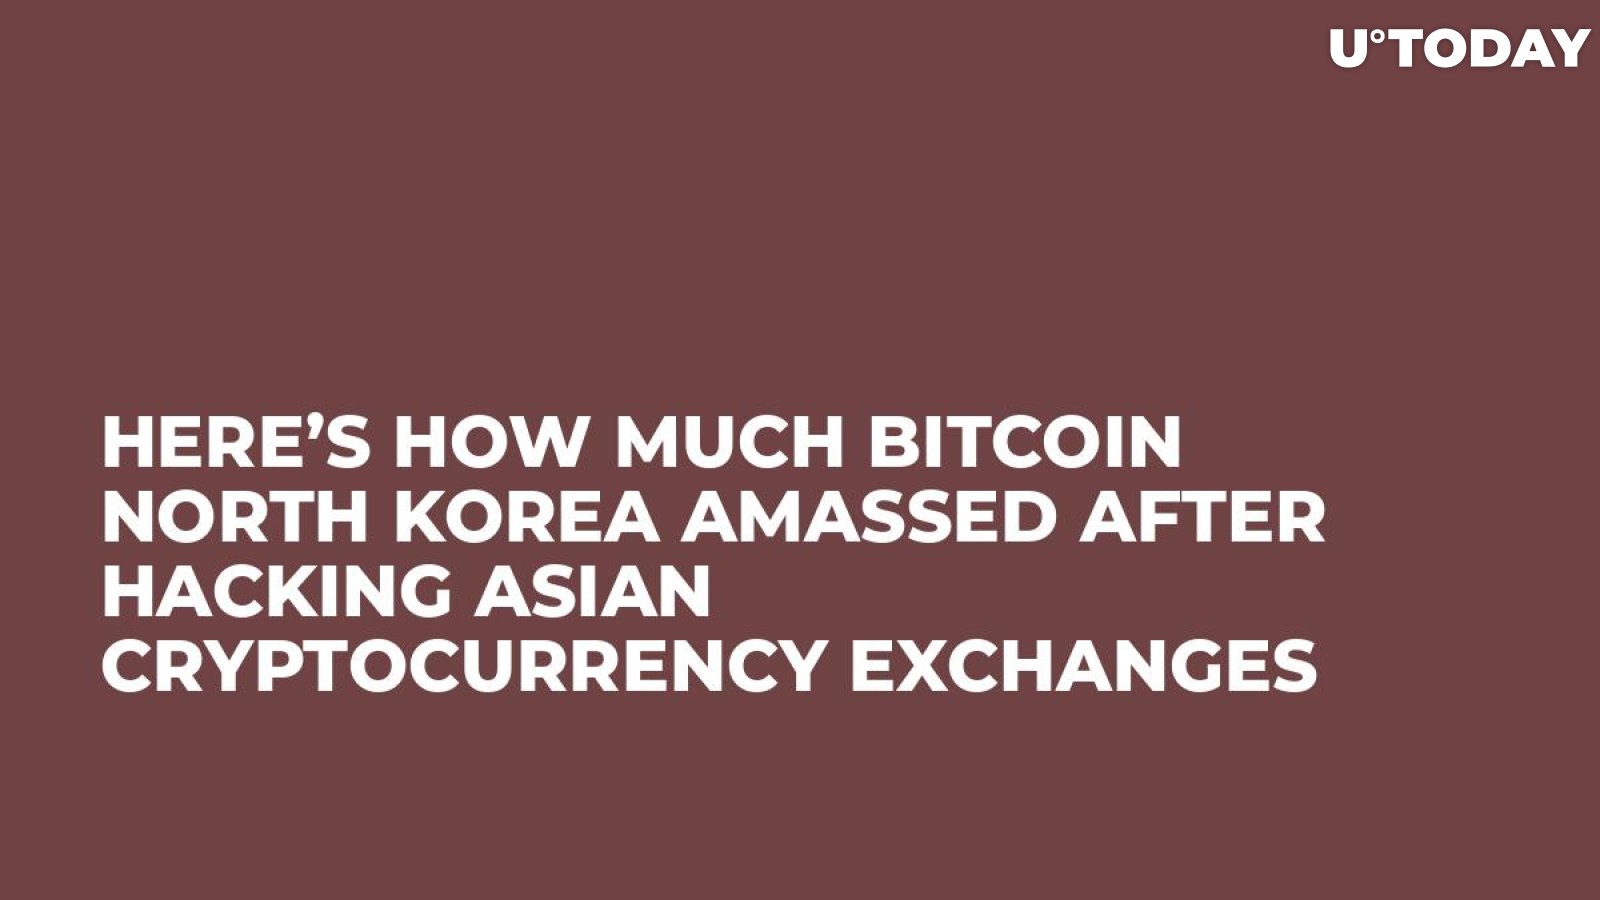 Here’s How Much Bitcoin North Korea Amassed After Hacking Asian Cryptocurrency Exchanges   